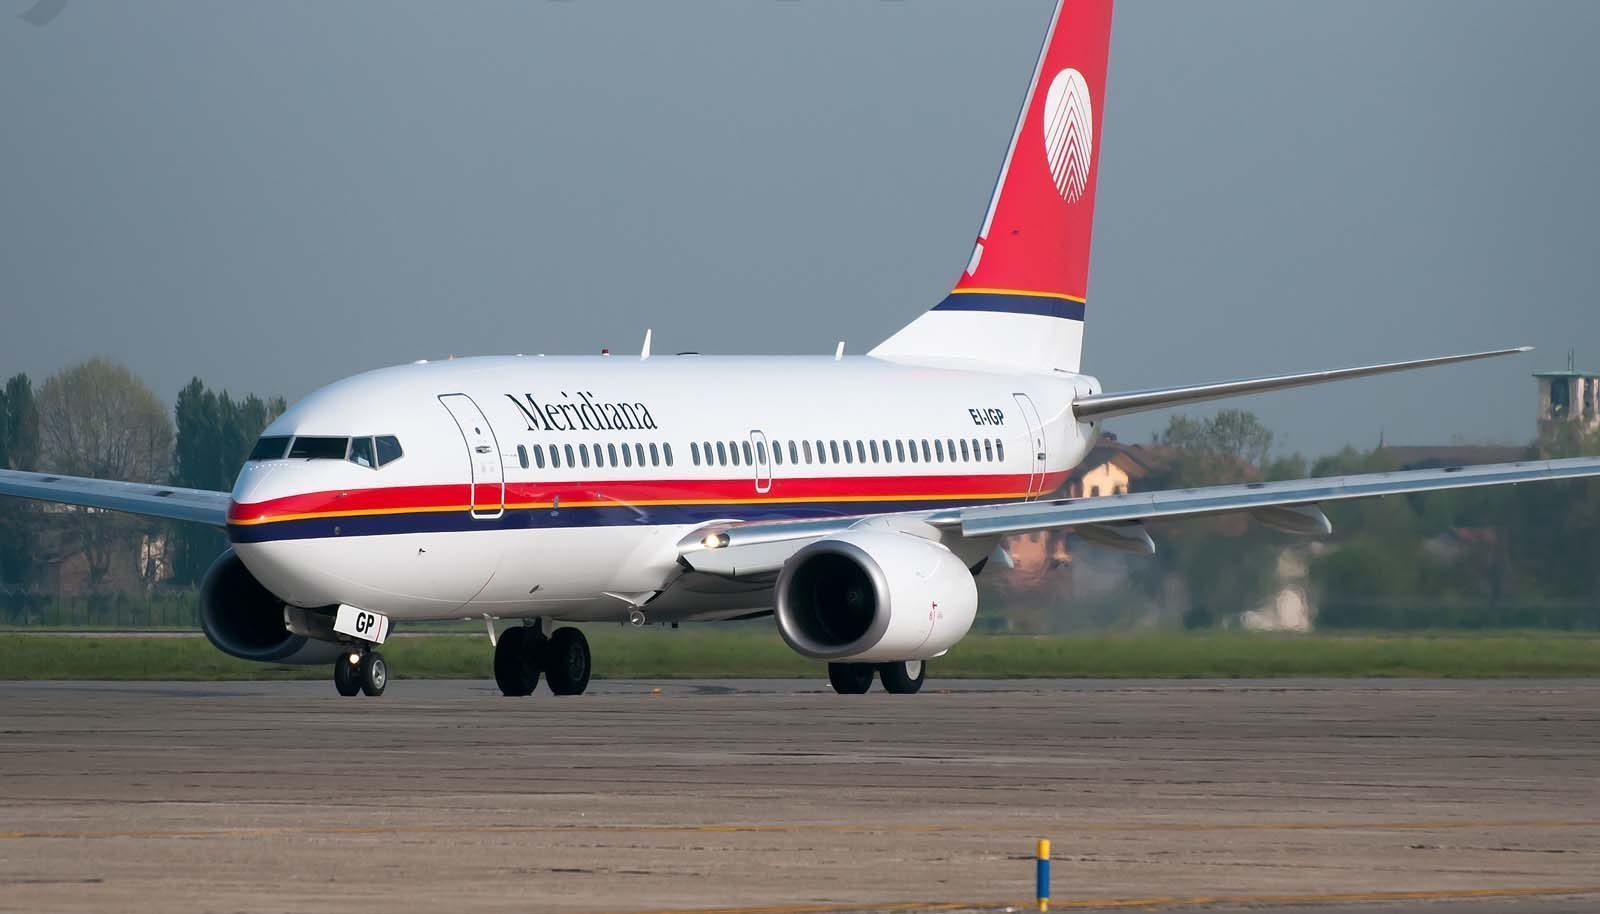 A Meridiana Boeing 737.